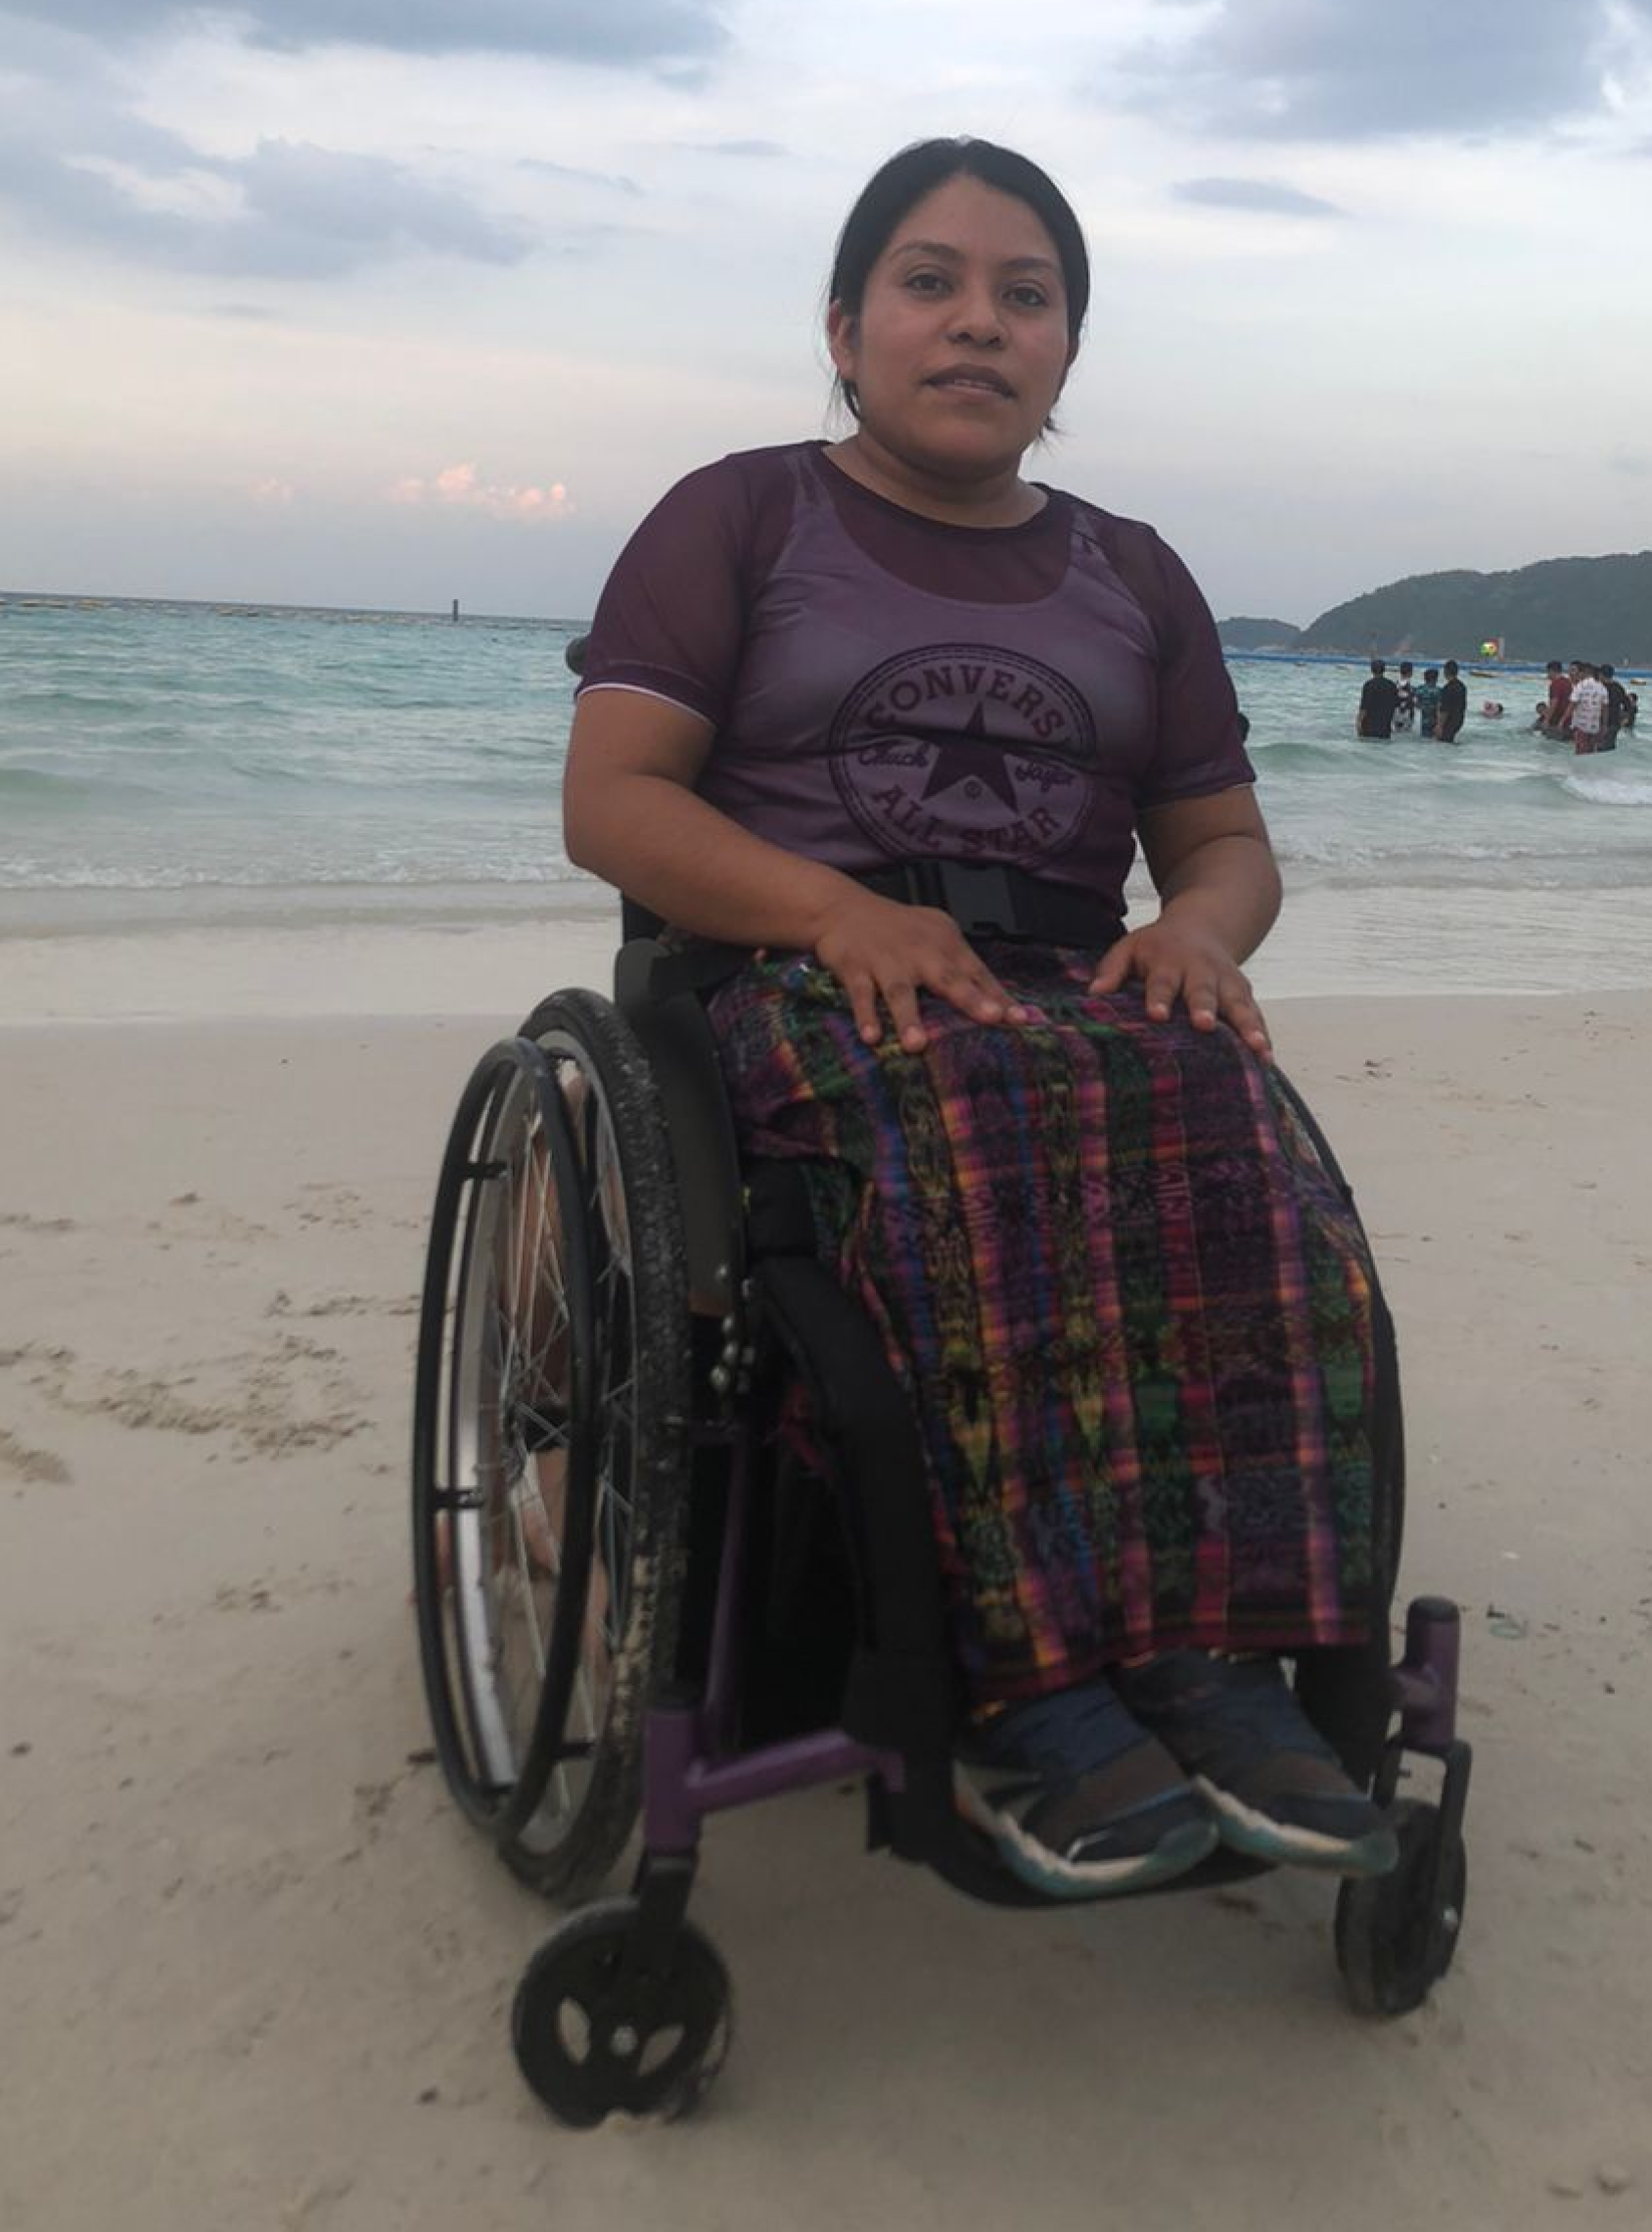 A woman in a brown shirt and pants sits on a wheelchair on a sandy beach in Guatemala